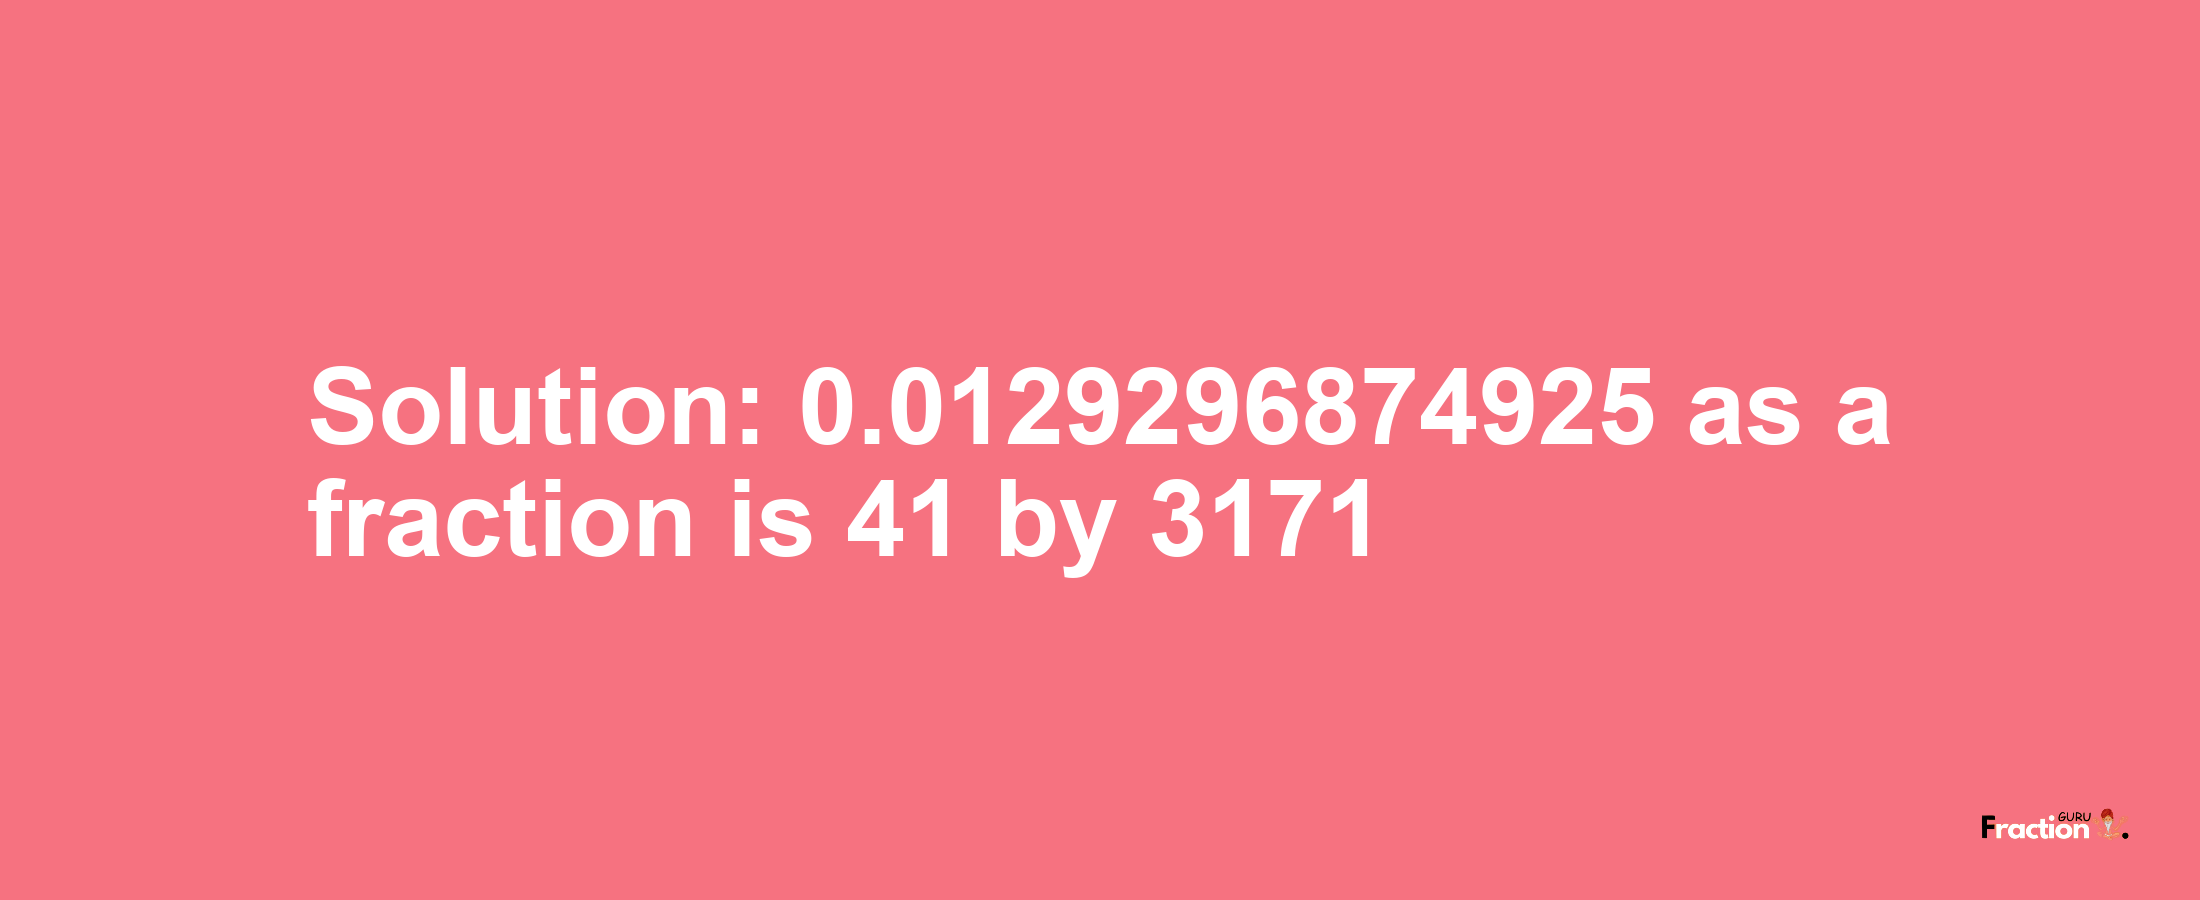 Solution:0.0129296874925 as a fraction is 41/3171